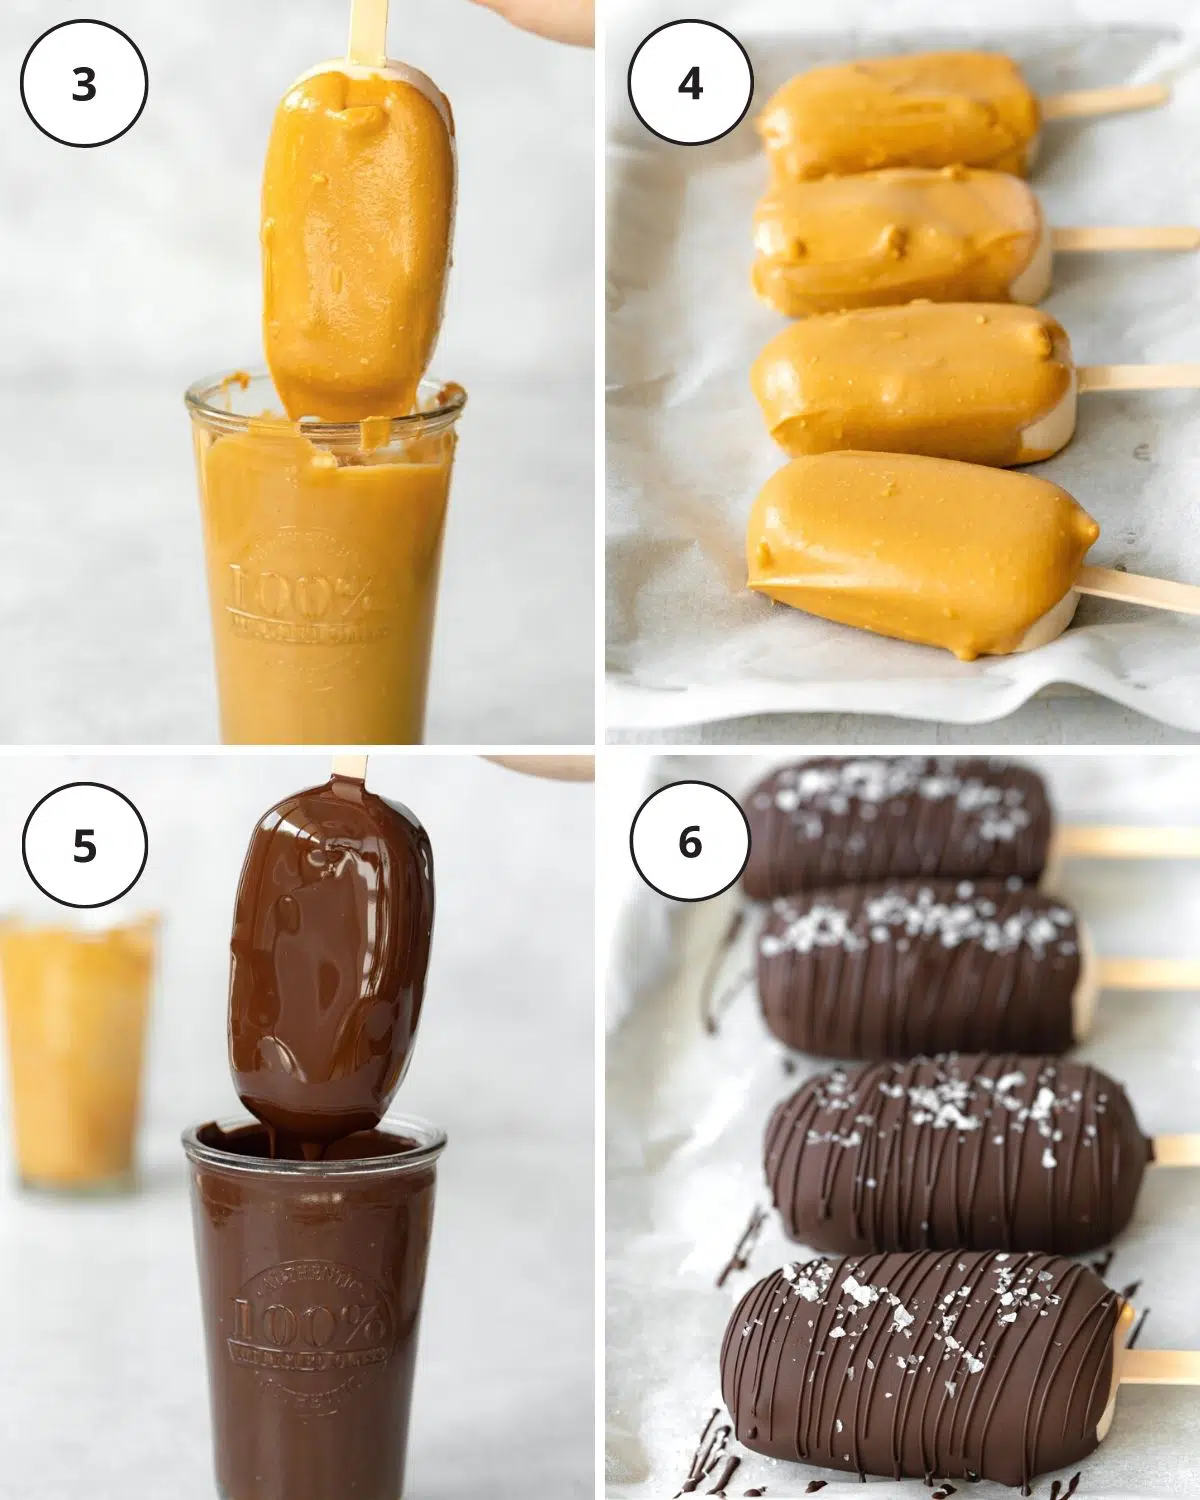 dipping ice cream bars in peanut butter and chocolate.